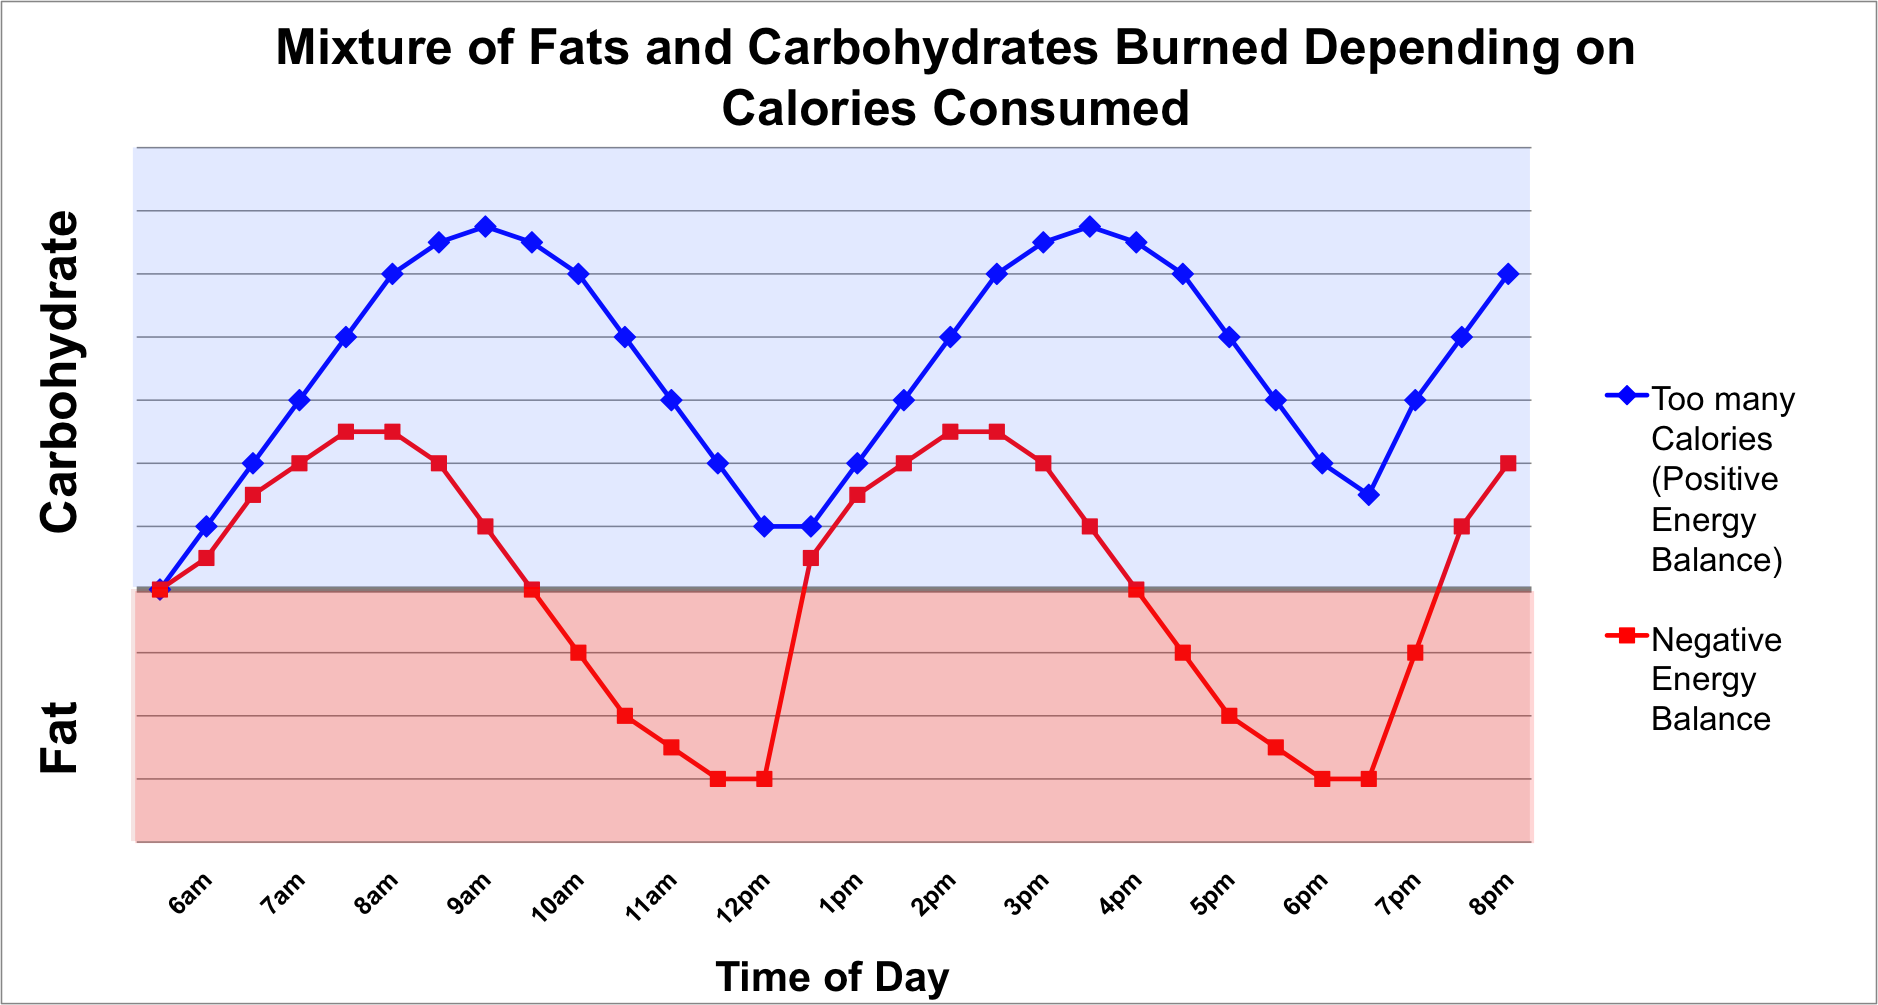 Mixture of fats and carbohydrates burned depending on number of calories consumed